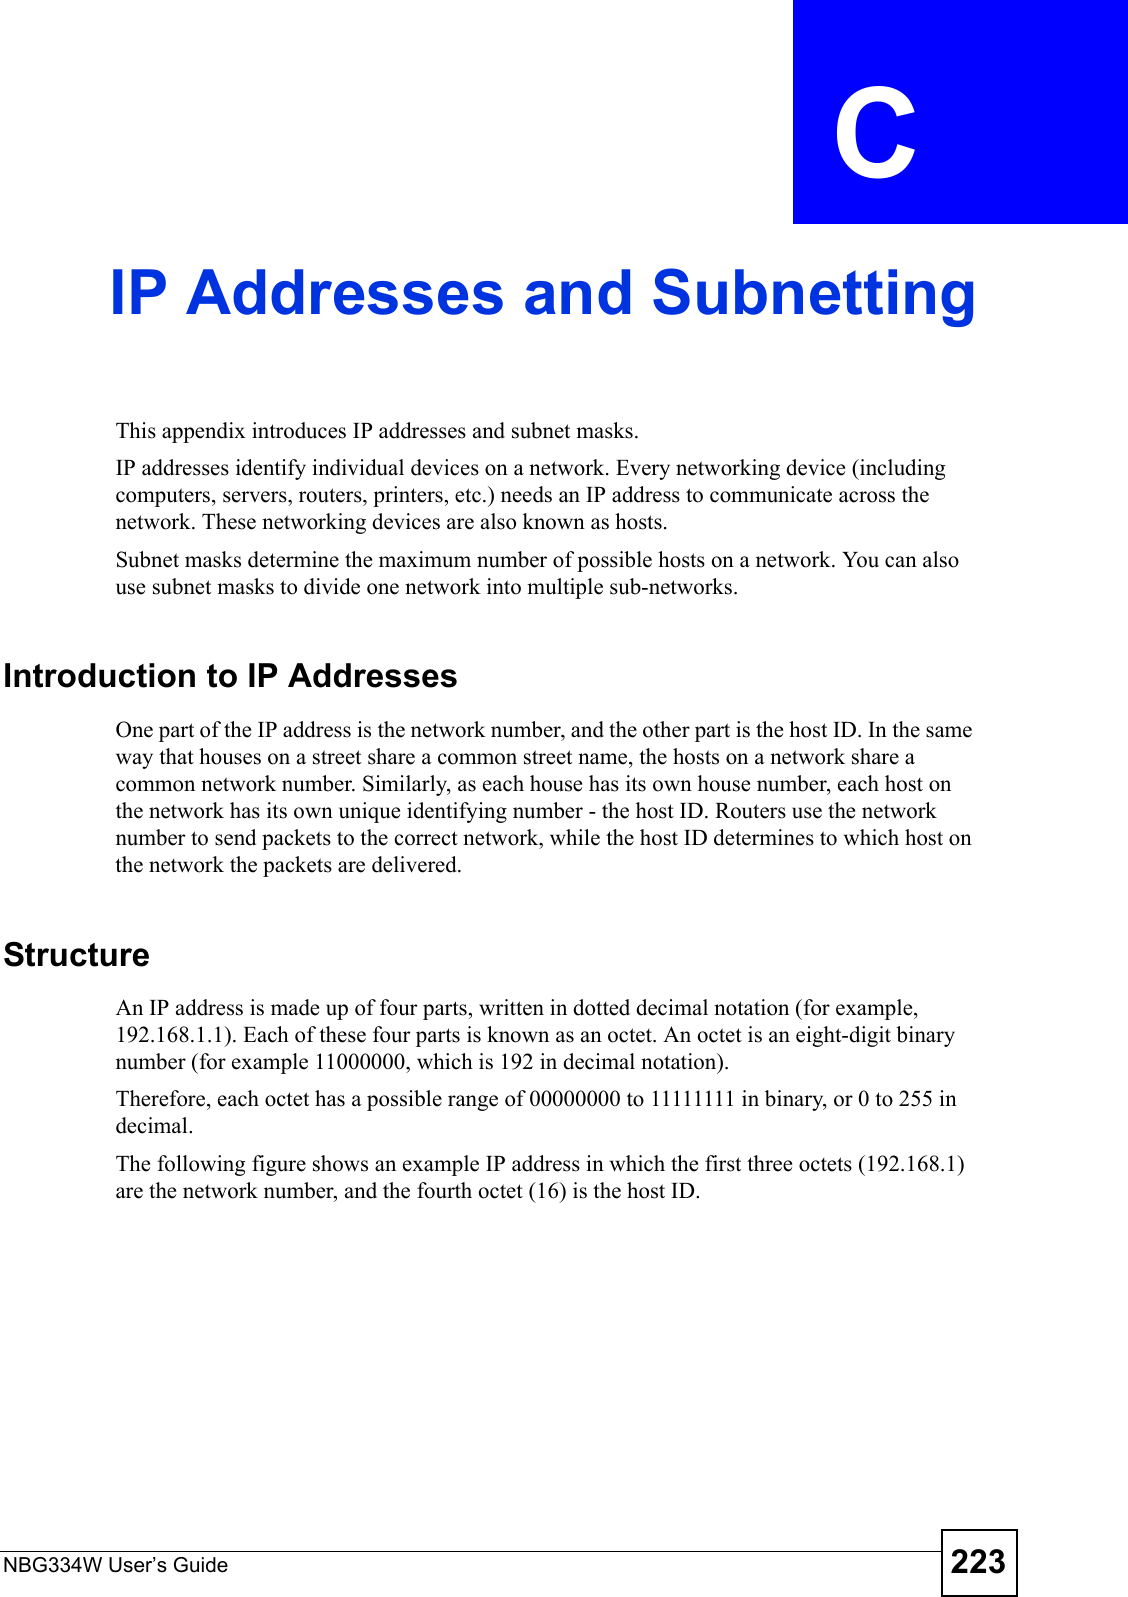 NBG334W User’s Guide 223APPENDIX  C IP Addresses and SubnettingThis appendix introduces IP addresses and subnet masks. IP addresses identify individual devices on a network. Every networking device (including computers, servers, routers, printers, etc.) needs an IP address to communicate across the network. These networking devices are also known as hosts.Subnet masks determine the maximum number of possible hosts on a network. You can also use subnet masks to divide one network into multiple sub-networks.Introduction to IP AddressesOne part of the IP address is the network number, and the other part is the host ID. In the same way that houses on a street share a common street name, the hosts on a network share a common network number. Similarly, as each house has its own house number, each host on the network has its own unique identifying number - the host ID. Routers use the network number to send packets to the correct network, while the host ID determines to which host on the network the packets are delivered.StructureAn IP address is made up of four parts, written in dotted decimal notation (for example, 192.168.1.1). Each of these four parts is known as an octet. An octet is an eight-digit binary number (for example 11000000, which is 192 in decimal notation). Therefore, each octet has a possible range of 00000000 to 11111111 in binary, or 0 to 255 in decimal.The following figure shows an example IP address in which the first three octets (192.168.1) are the network number, and the fourth octet (16) is the host ID.